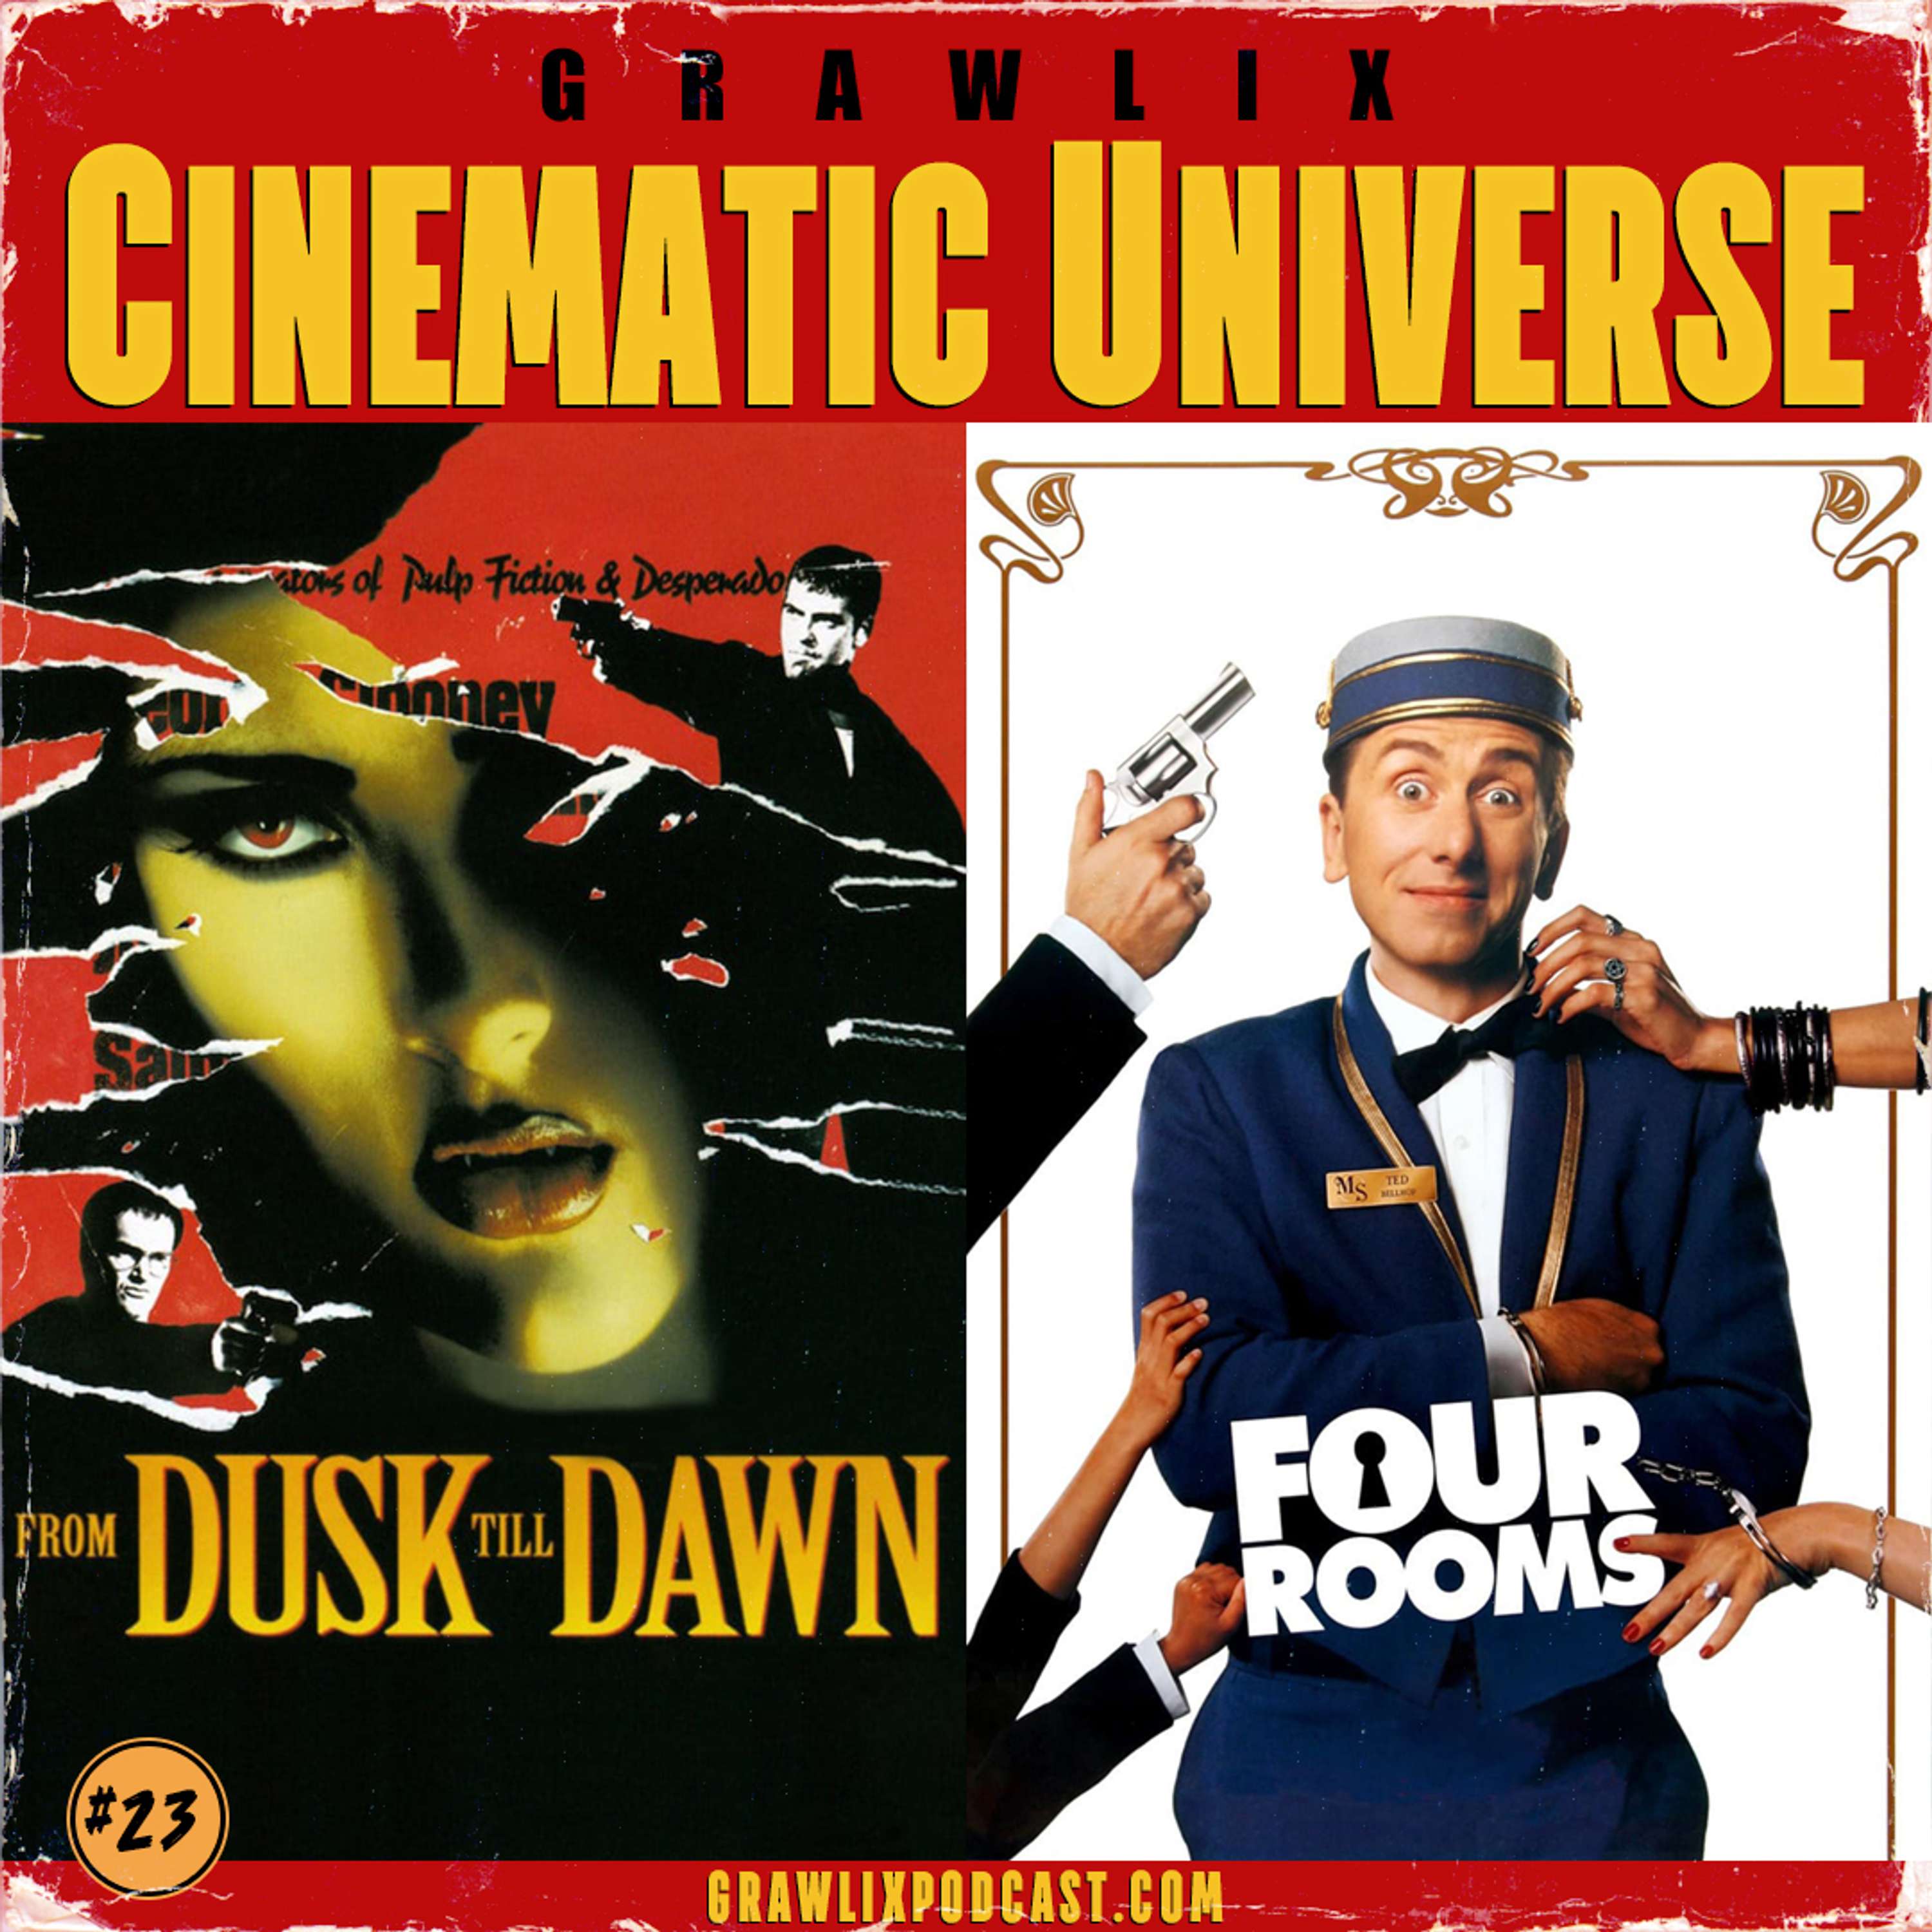 From Dusk Till Dawn & Four Rooms